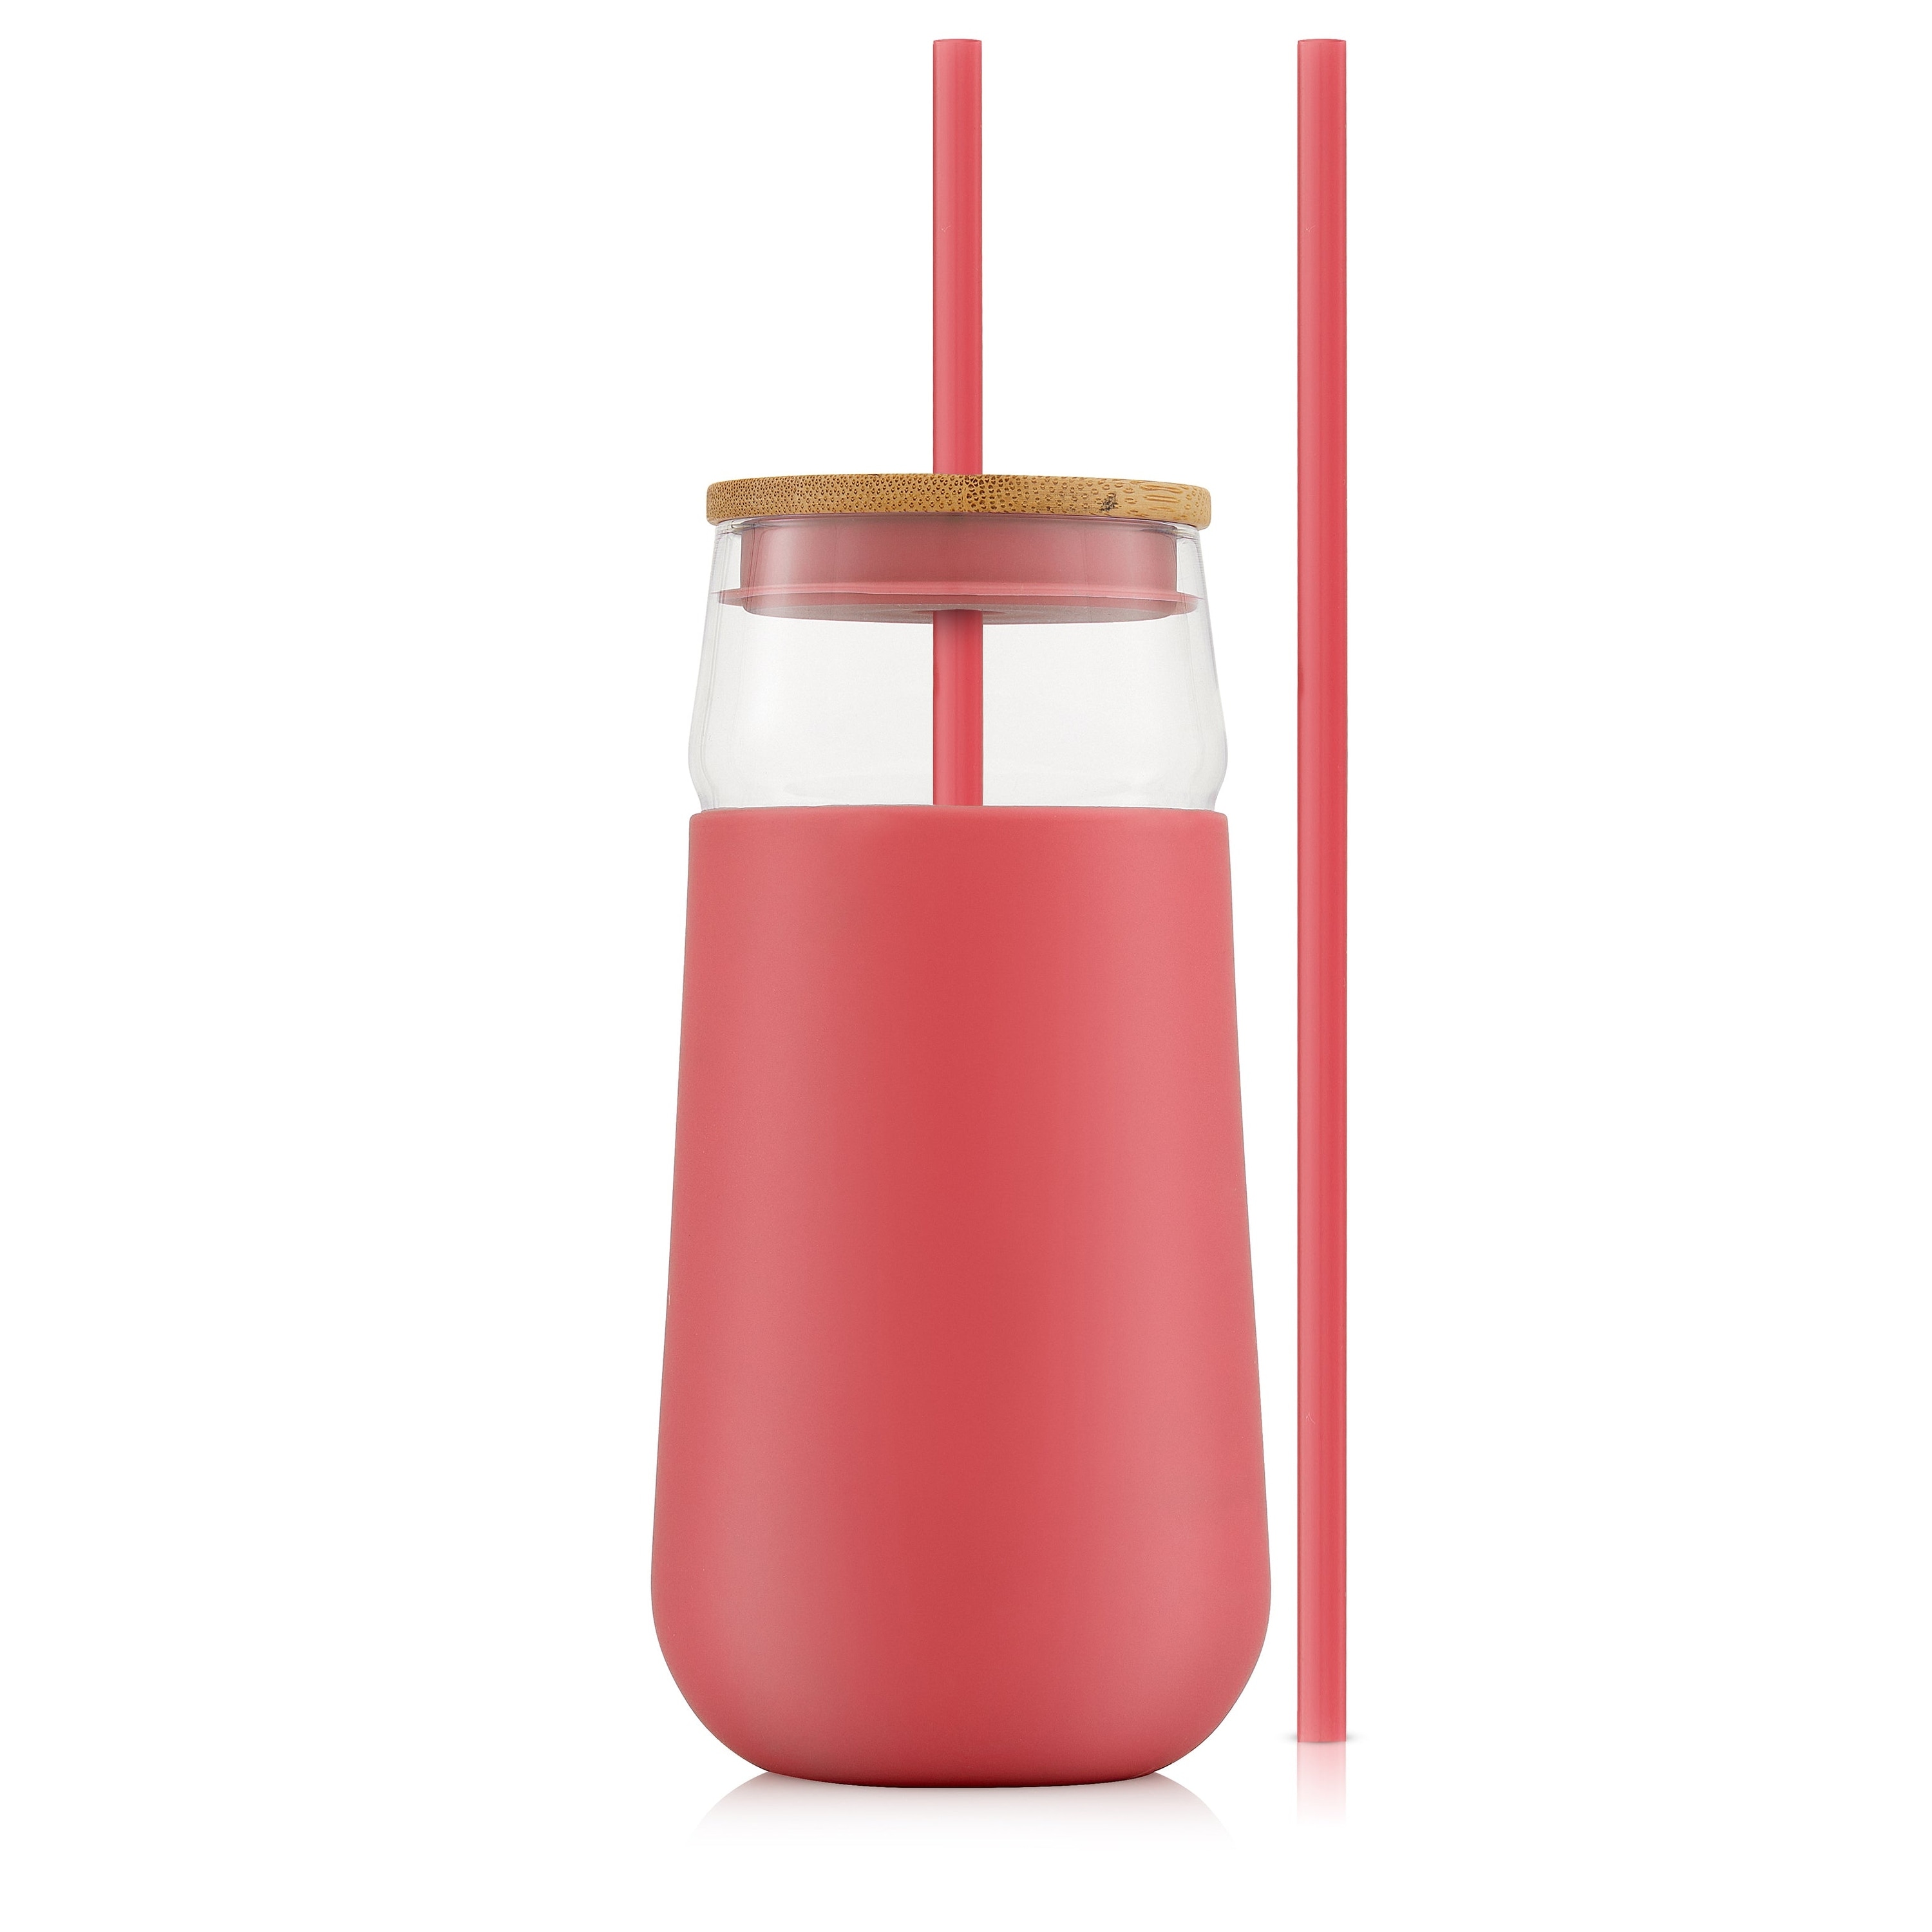 https://ak1.ostkcdn.com/images/products/is/images/direct/43be775c3354a4fe5dc6e5a99aed7075089daa35/JoyJolt-Glass-Tumbler-with-1-Straws-%26-Non-Slip-Silicone-Sleeve---20-oz.jpg